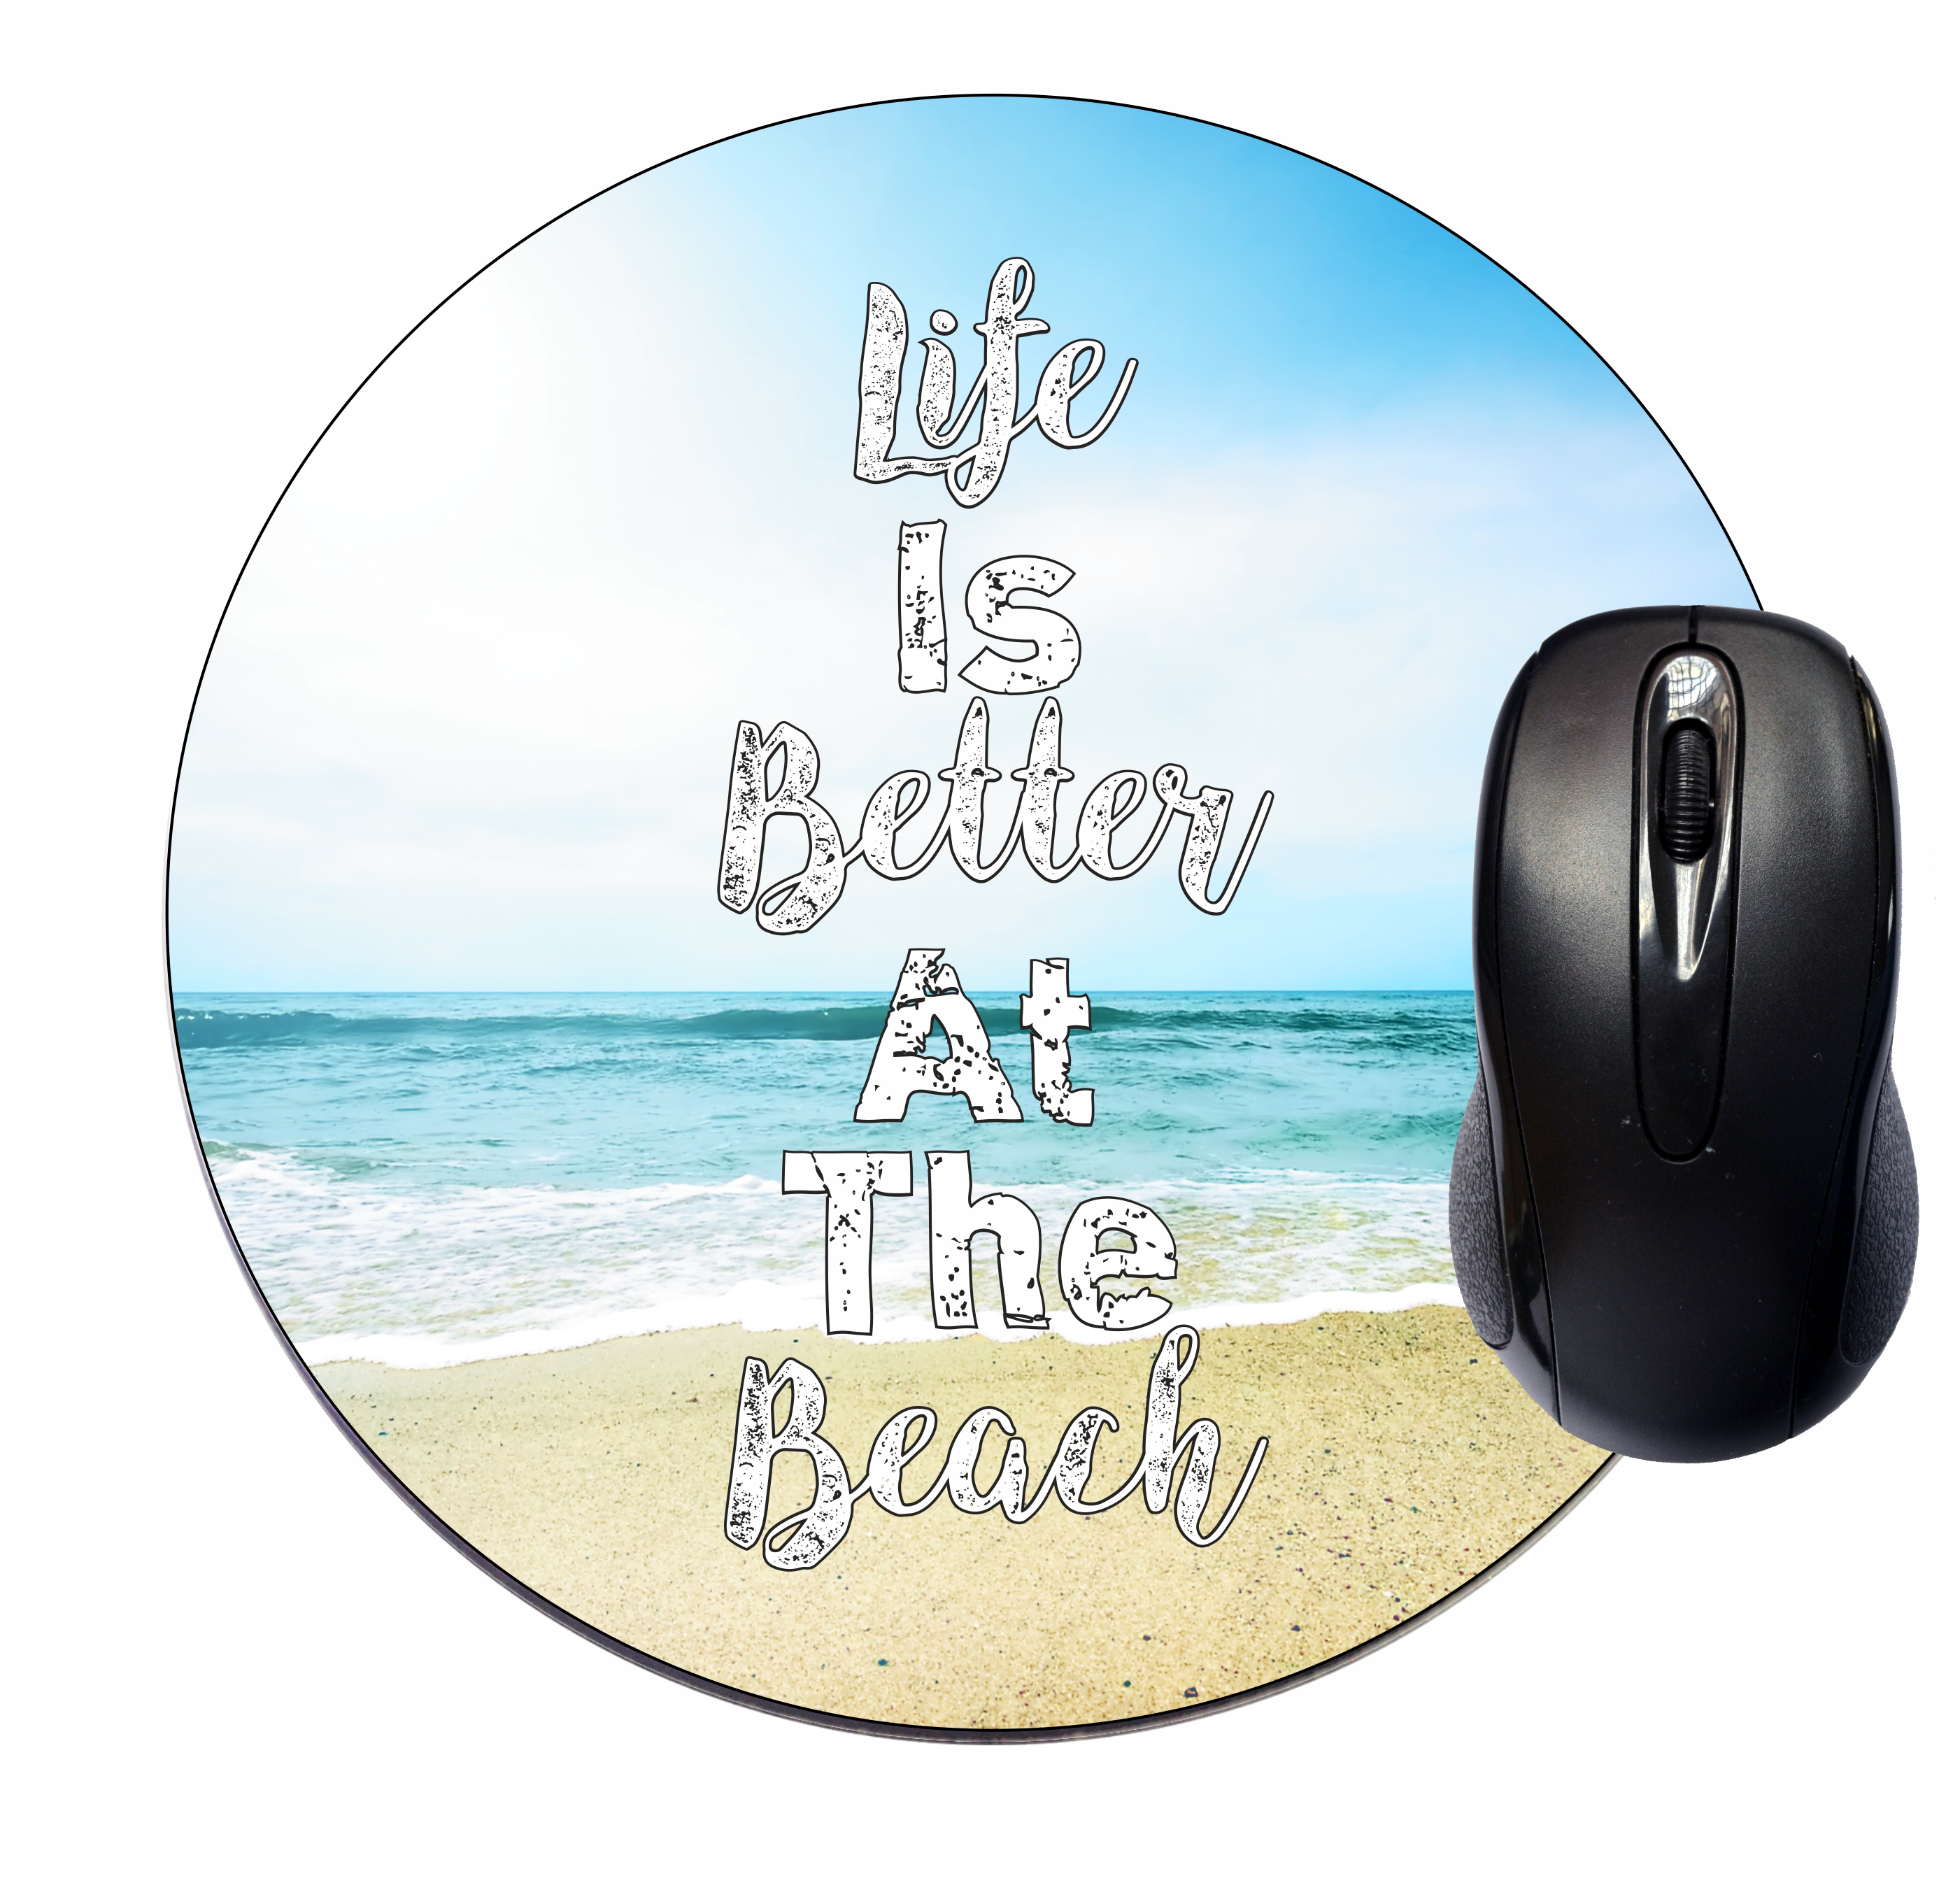 Mouse Mat Pad - Mousepad Cute Desk Round Circle Mousemat - Mouse Pad Beach Scene - Beach Quote - image 1 of 1